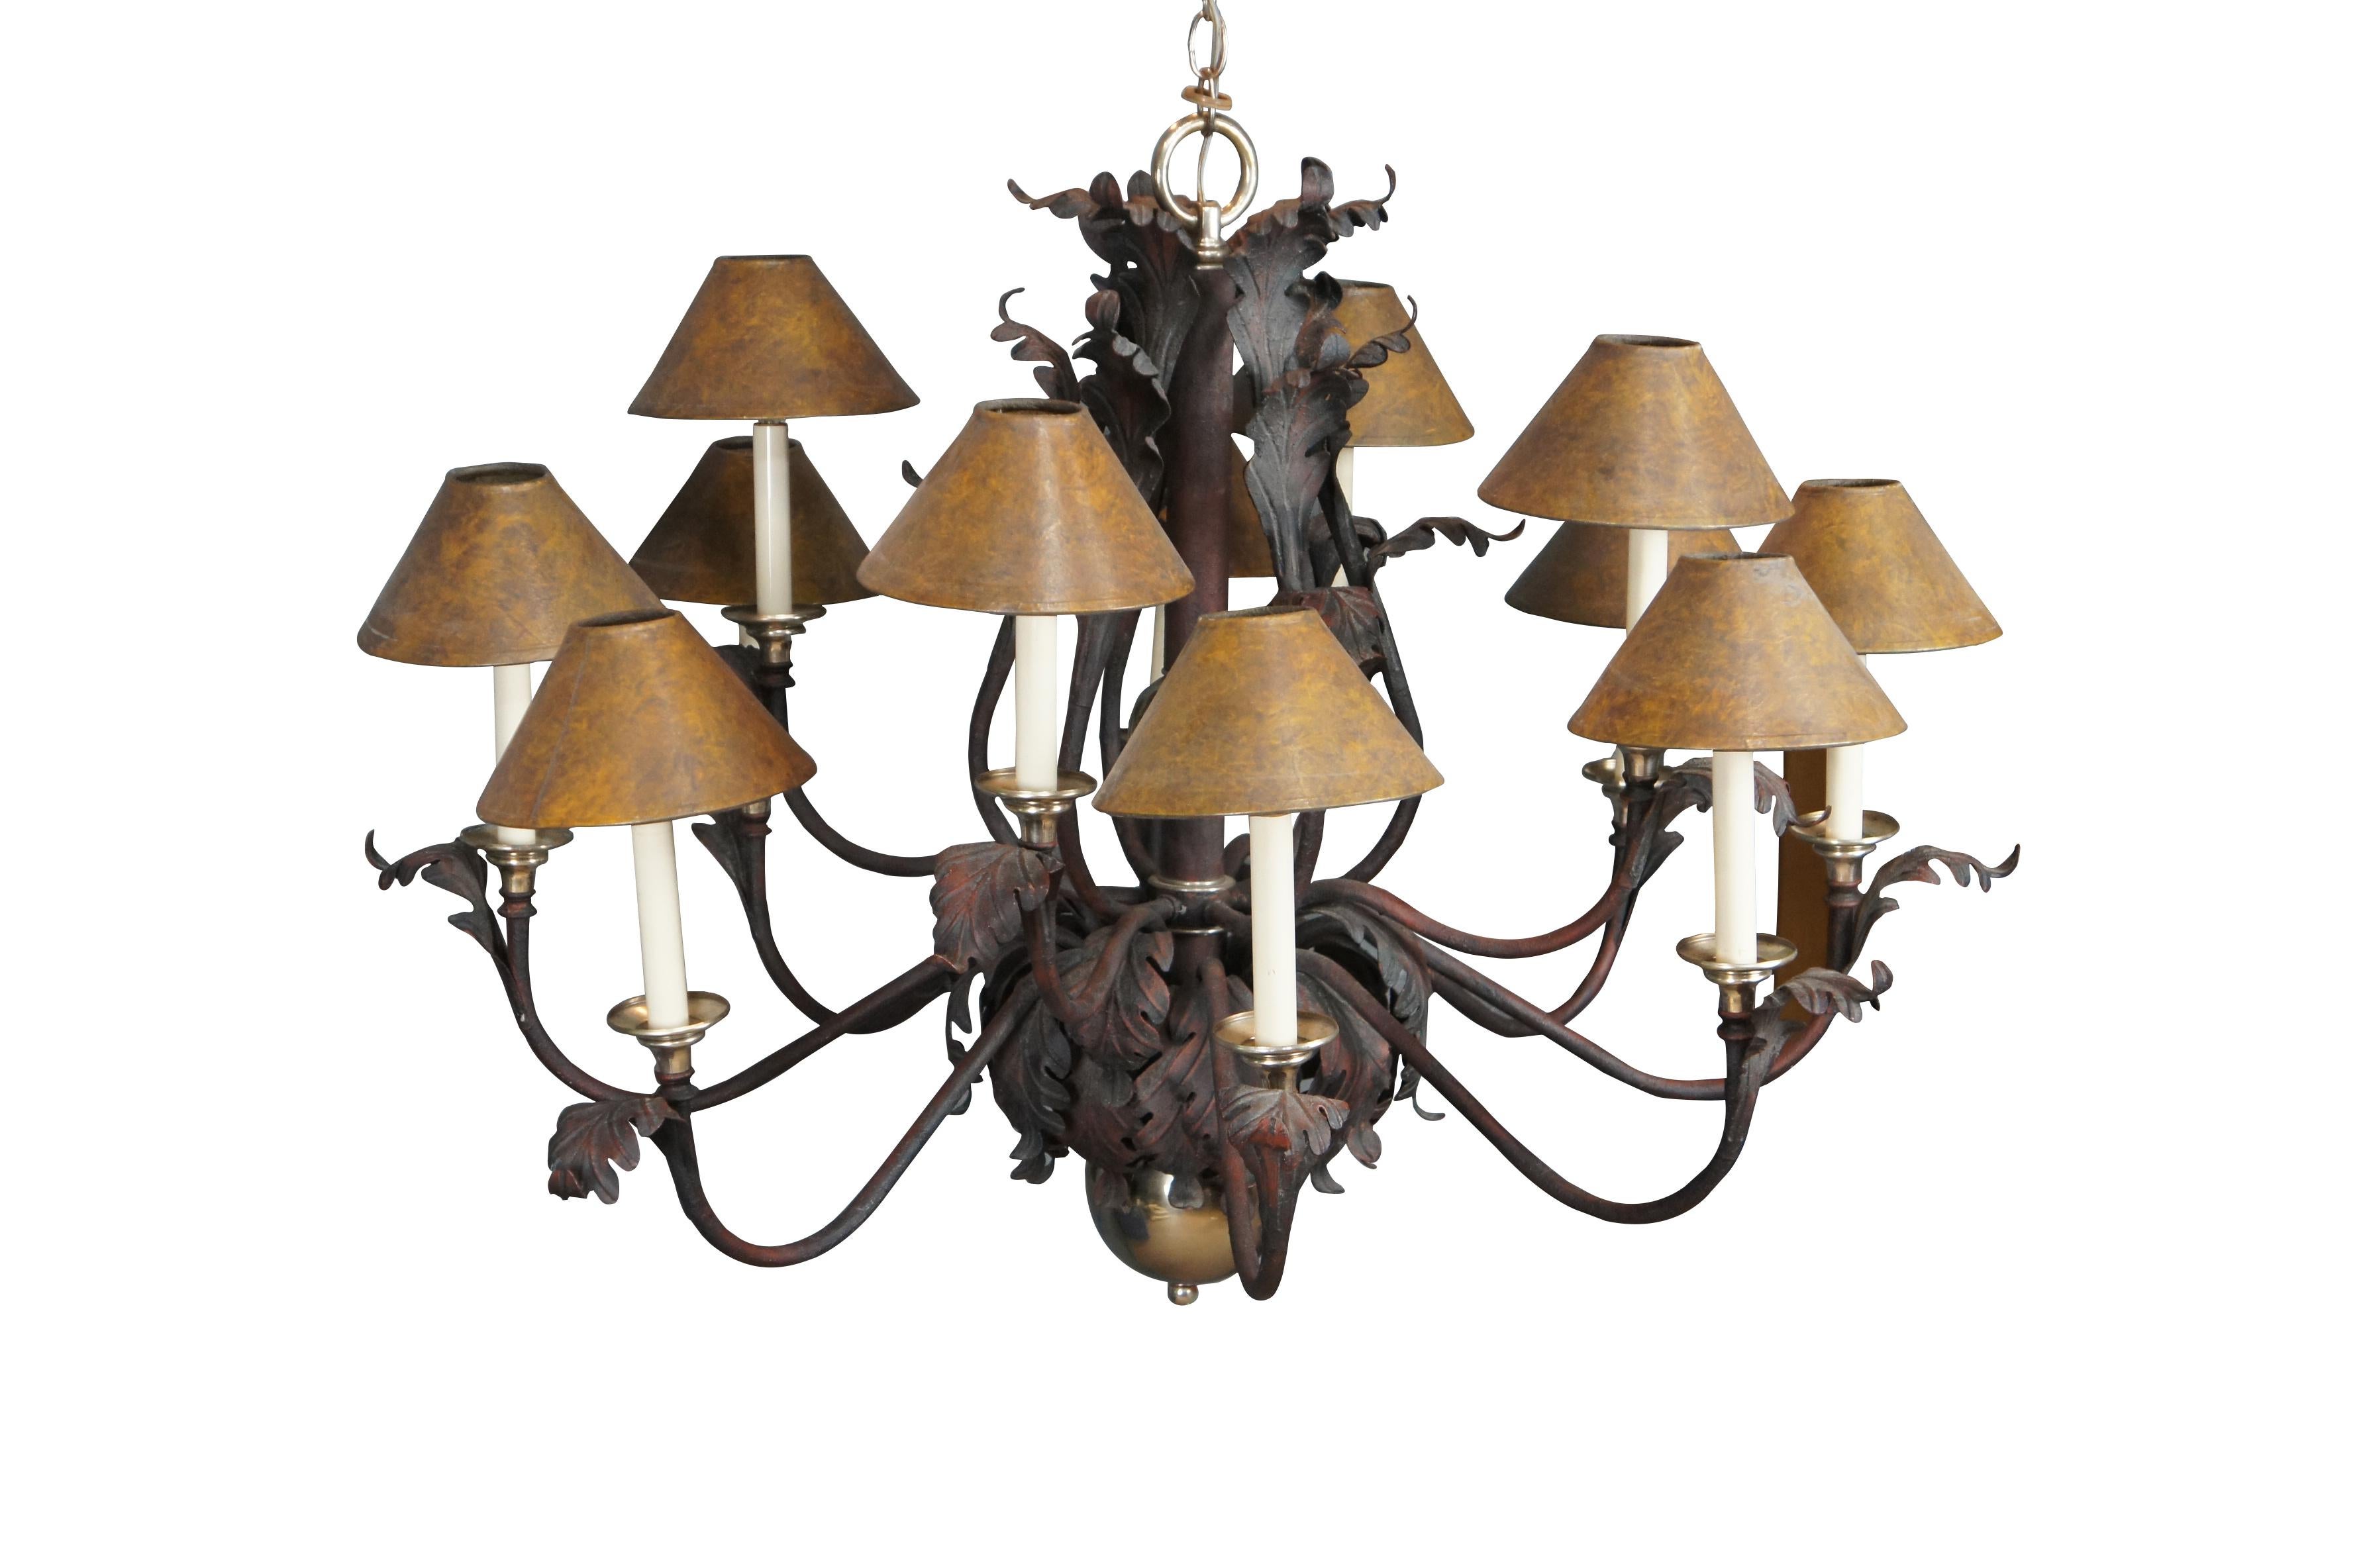 French Provincial Hart Associates French Scrolled Iron Brass 12 Light Acanthus Leaf Chandelier 44